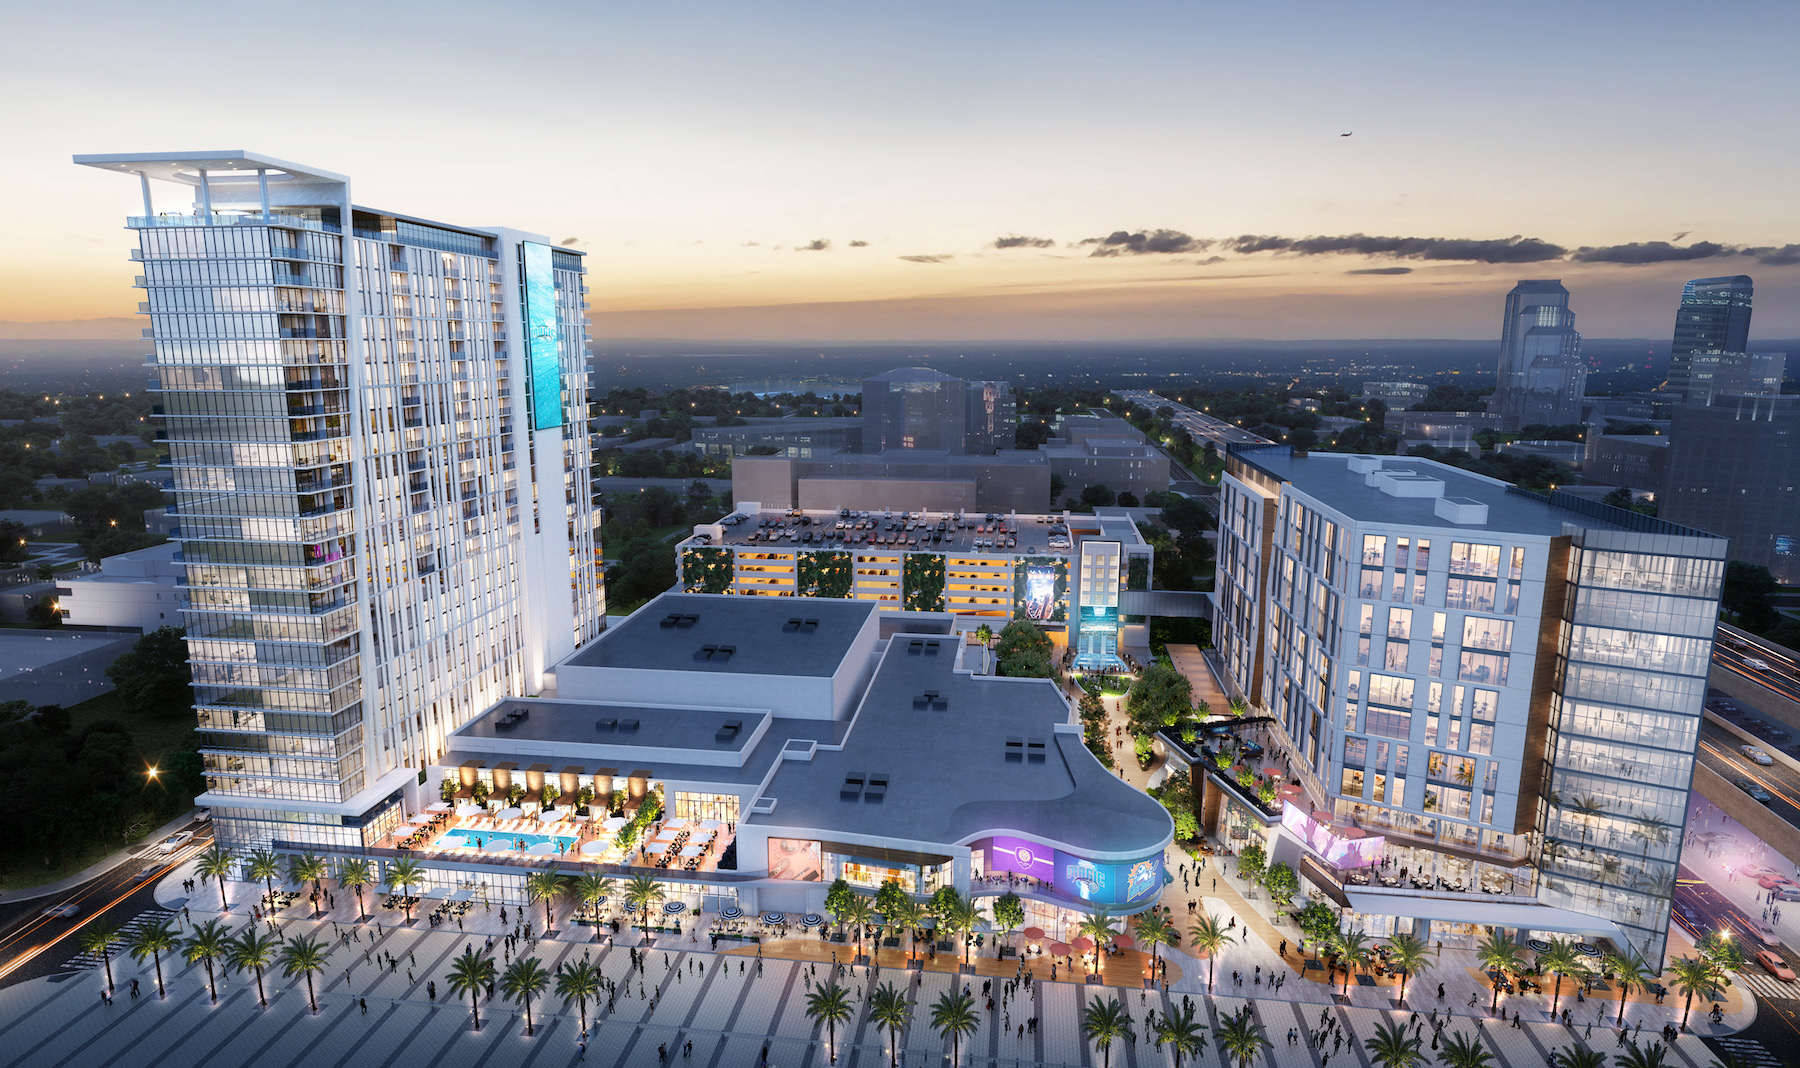 Rendering of downtown entertainment district in Orlando, Fla. Images: Baker Barrios Architects, courtesy ofSED Development